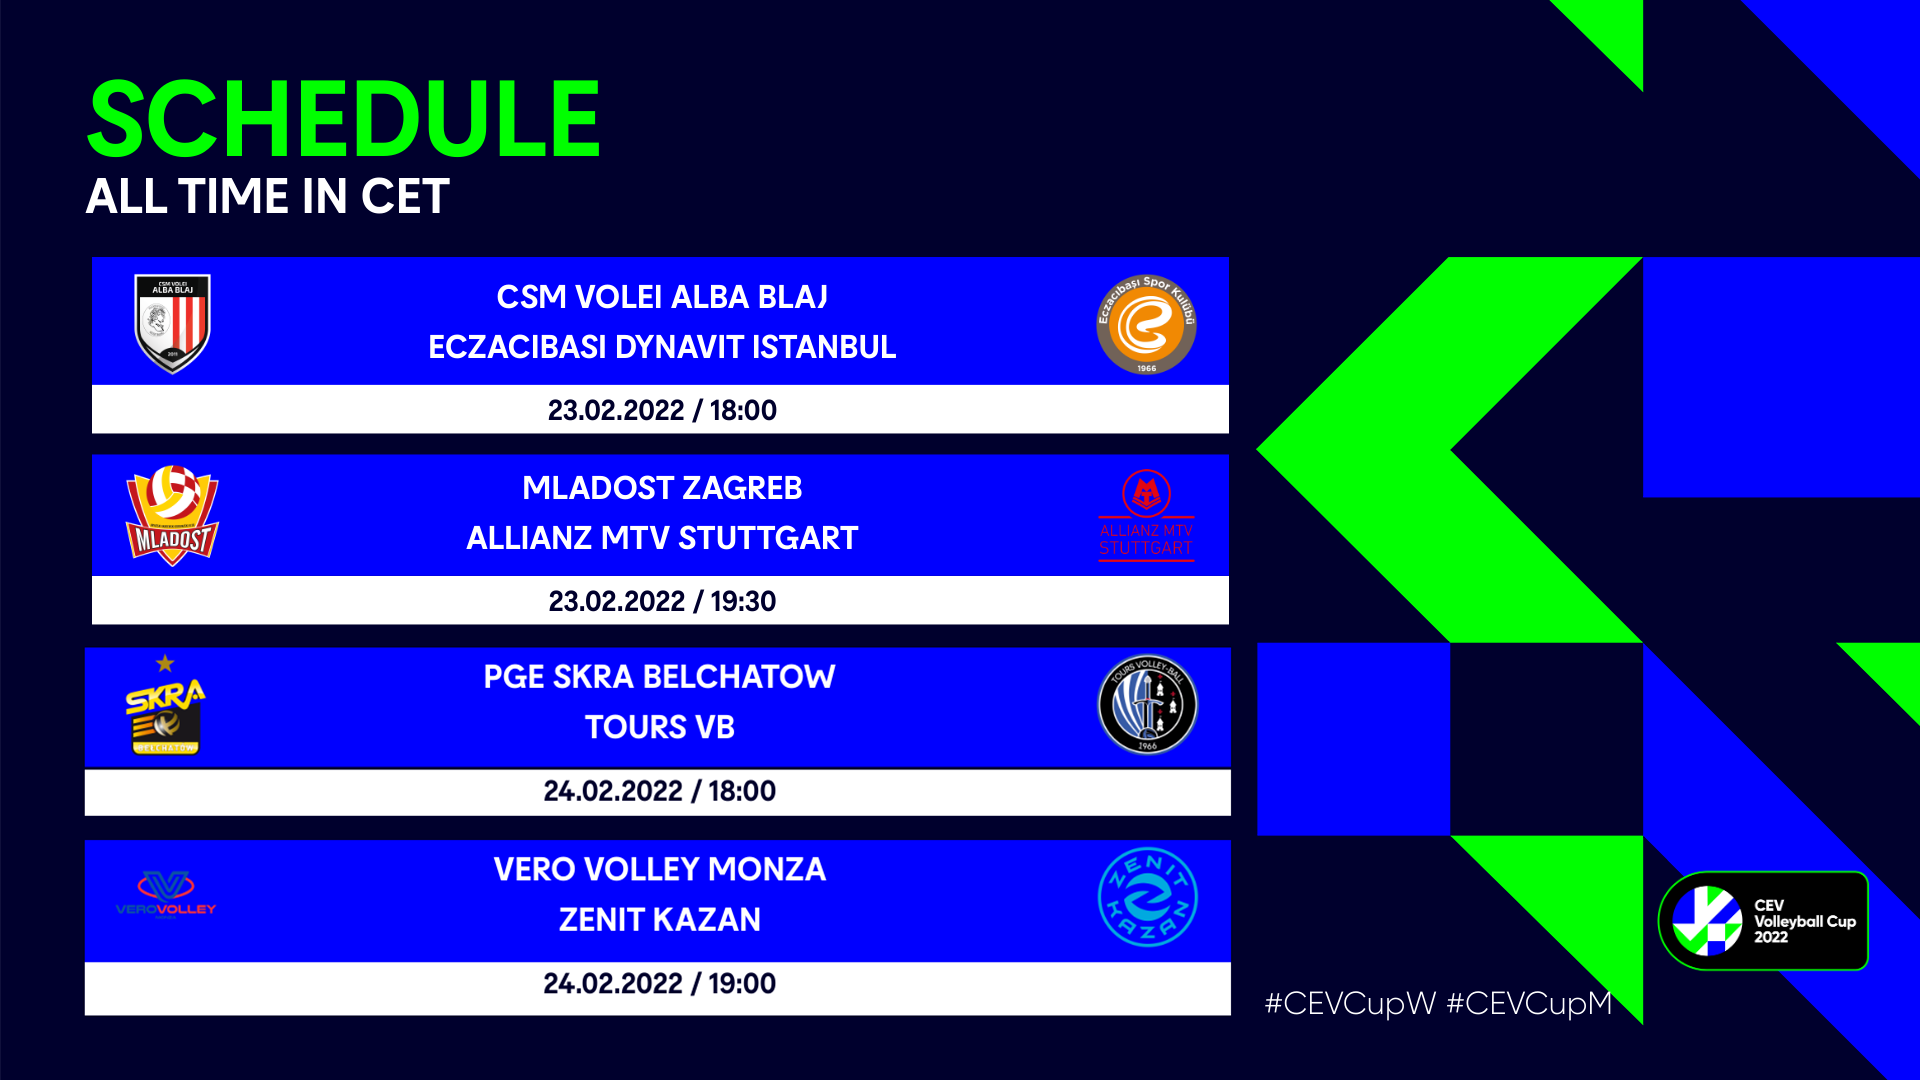 The Week of the CEV Cup Semi-Finals, Live on EuroVolley CEV